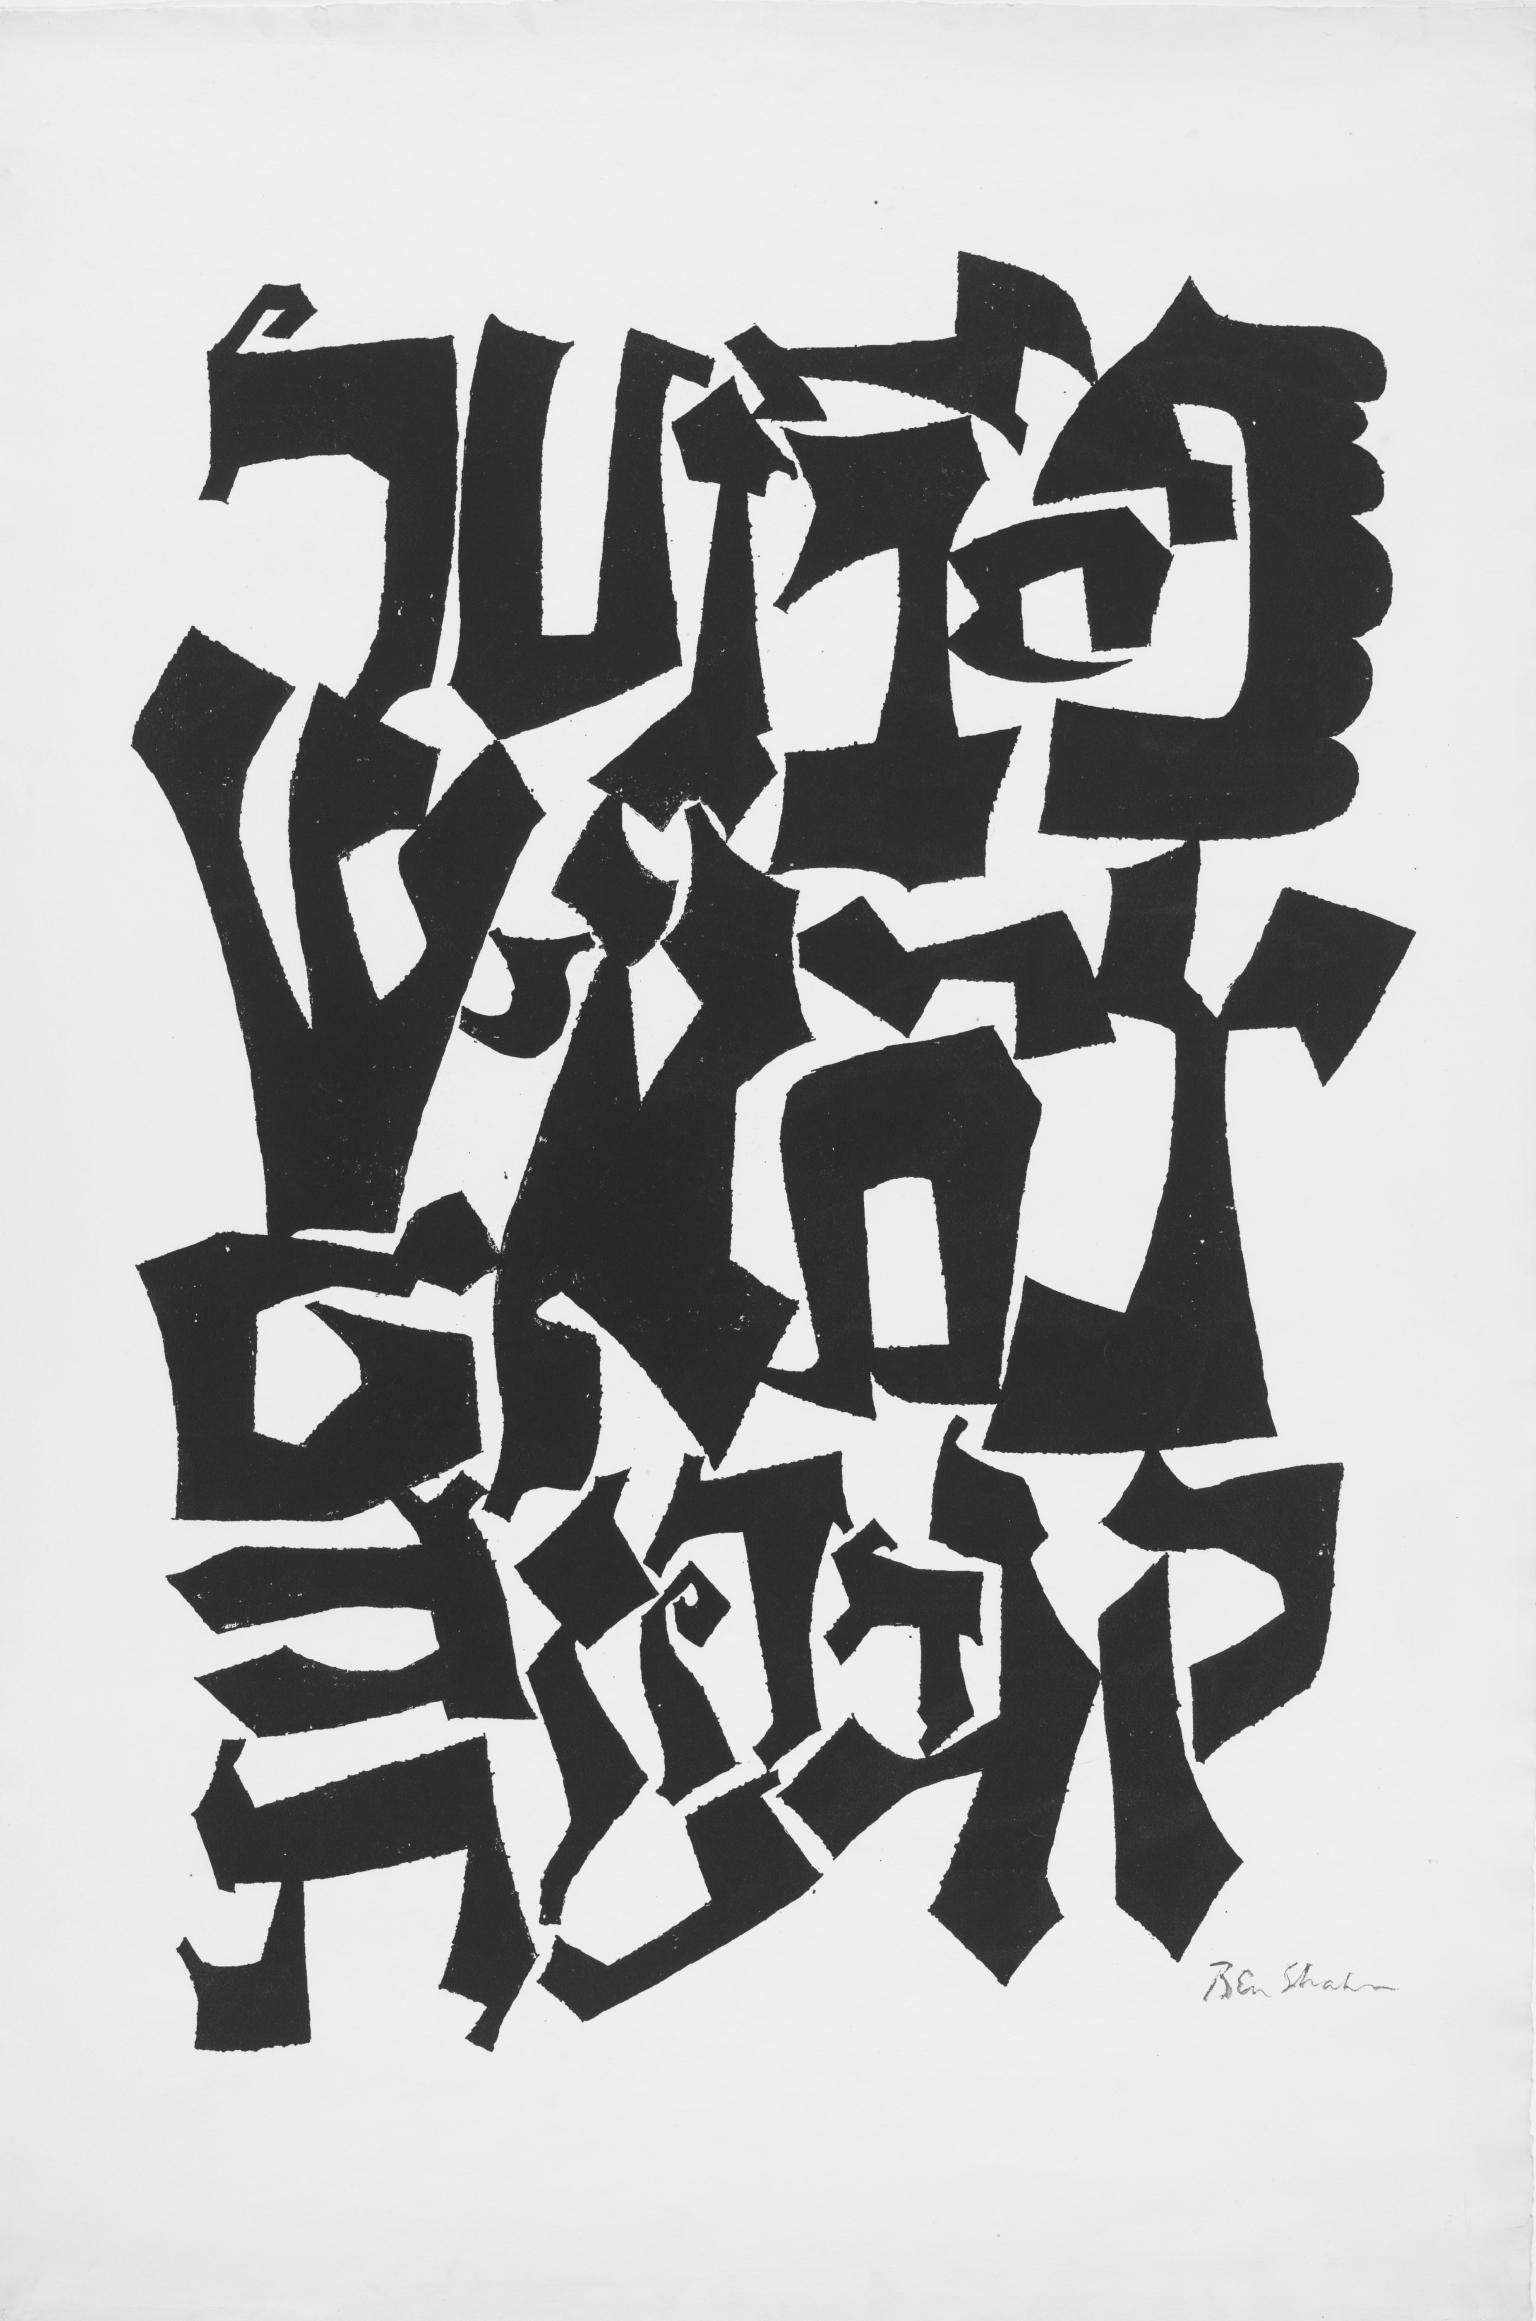 Abstract design featuring Hebrew letters written in block calligraphy.